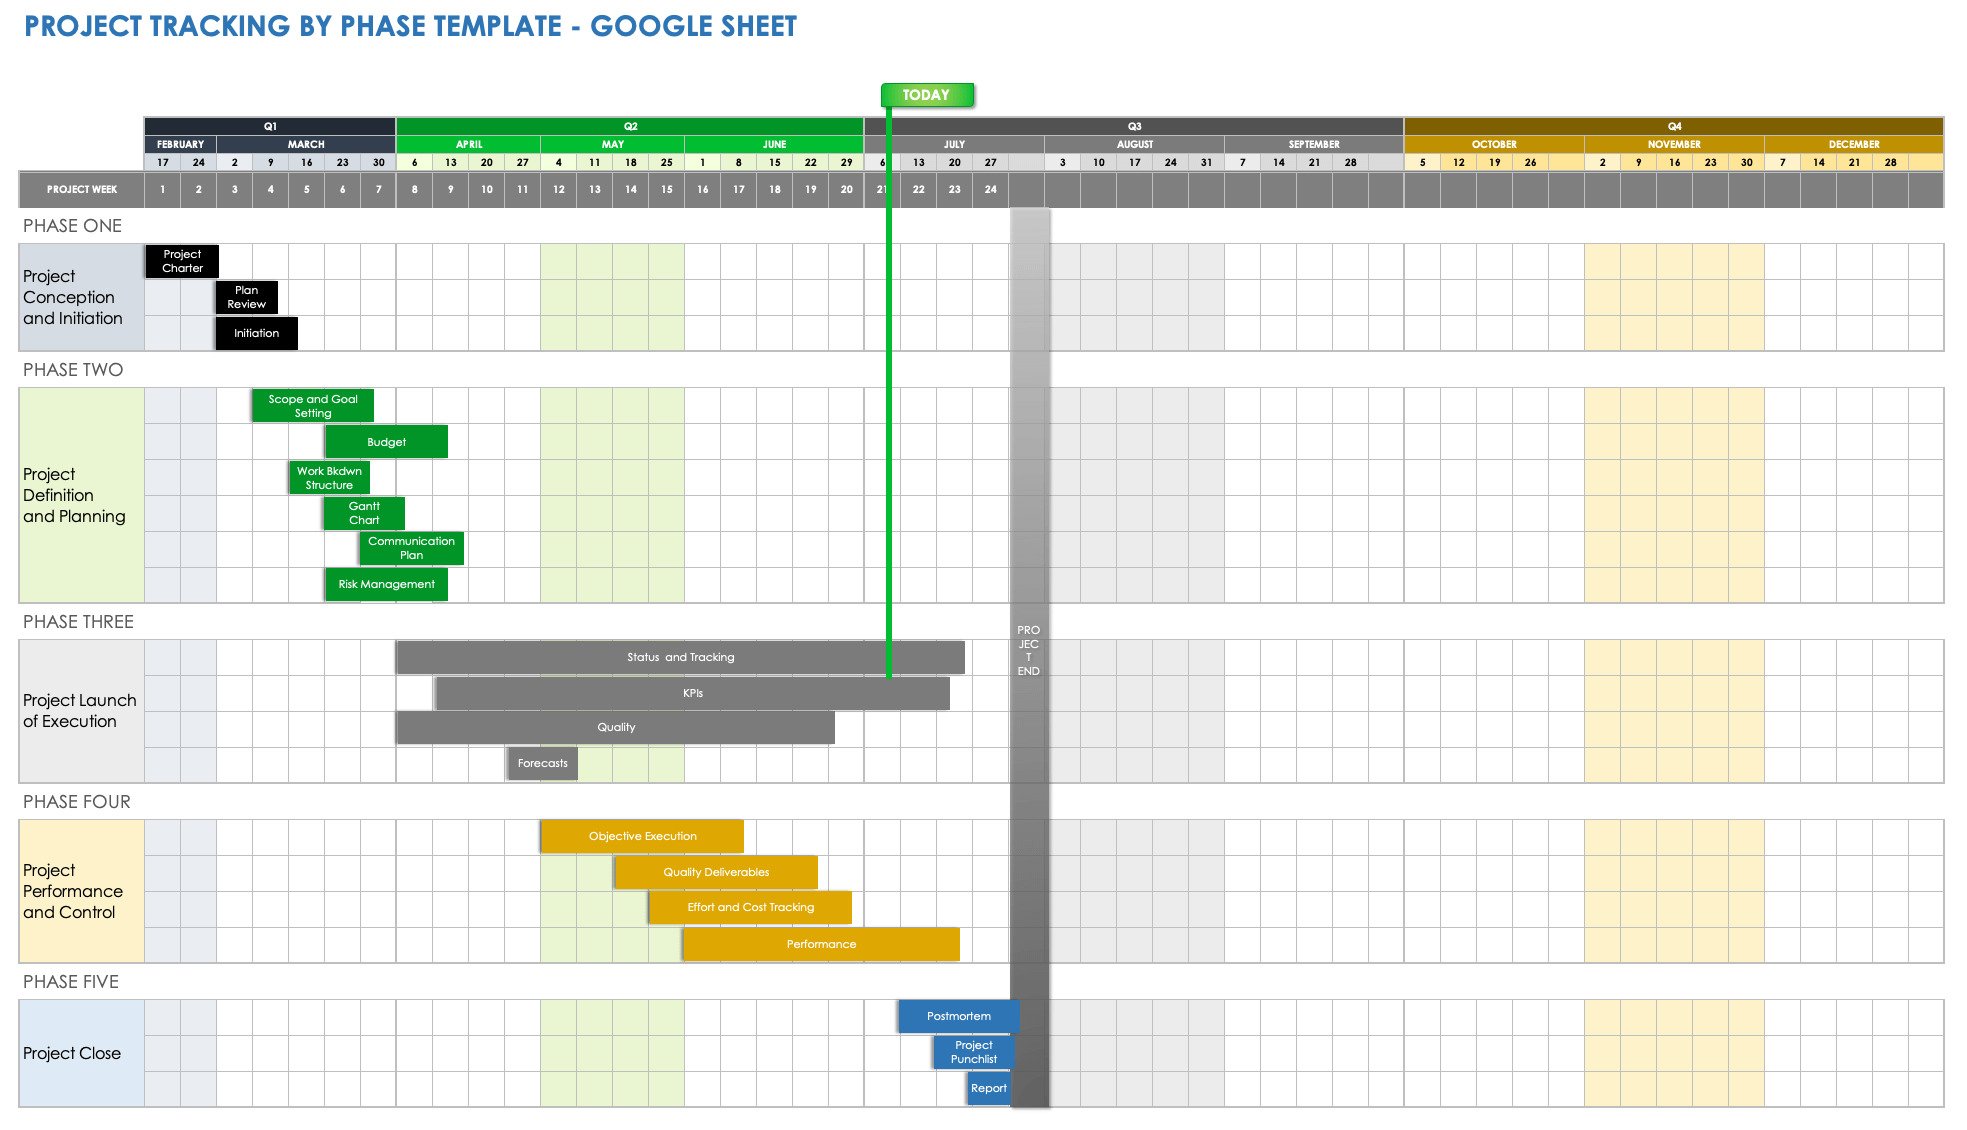 Project Tracking by Phase Template Google Sheets